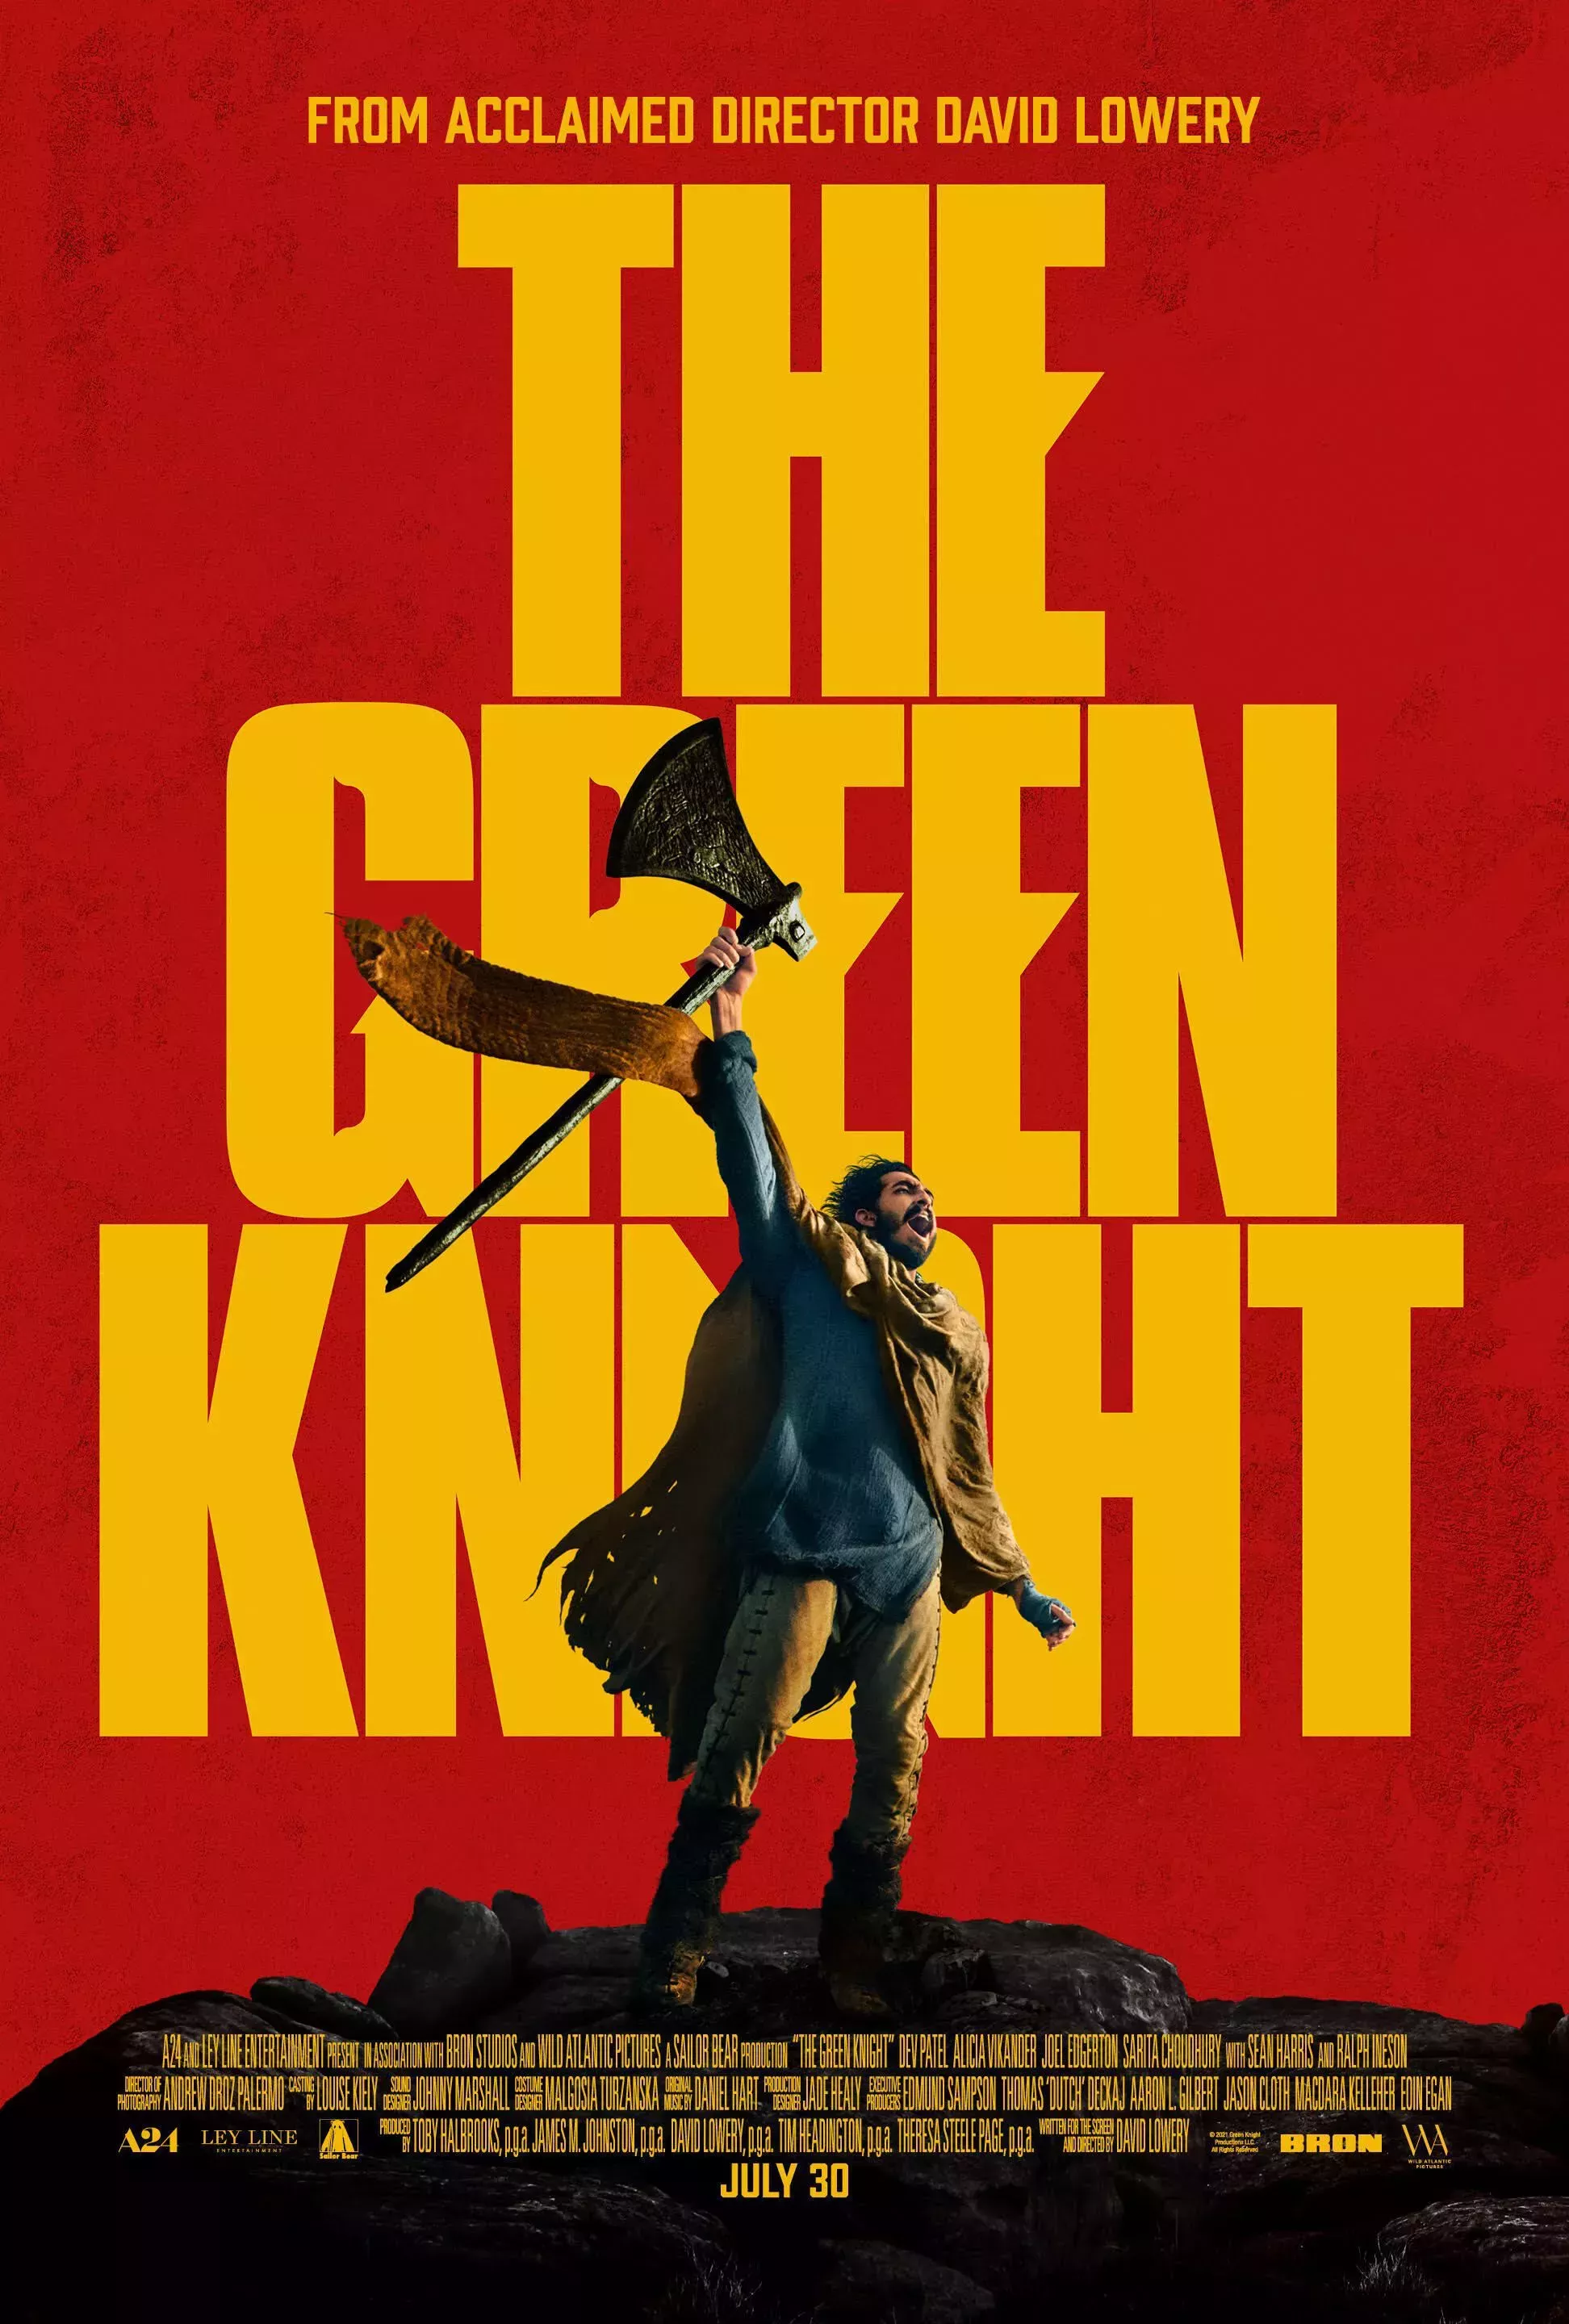 King Arthur's nephew raising an axe on the cover of The Green Knight movie poster